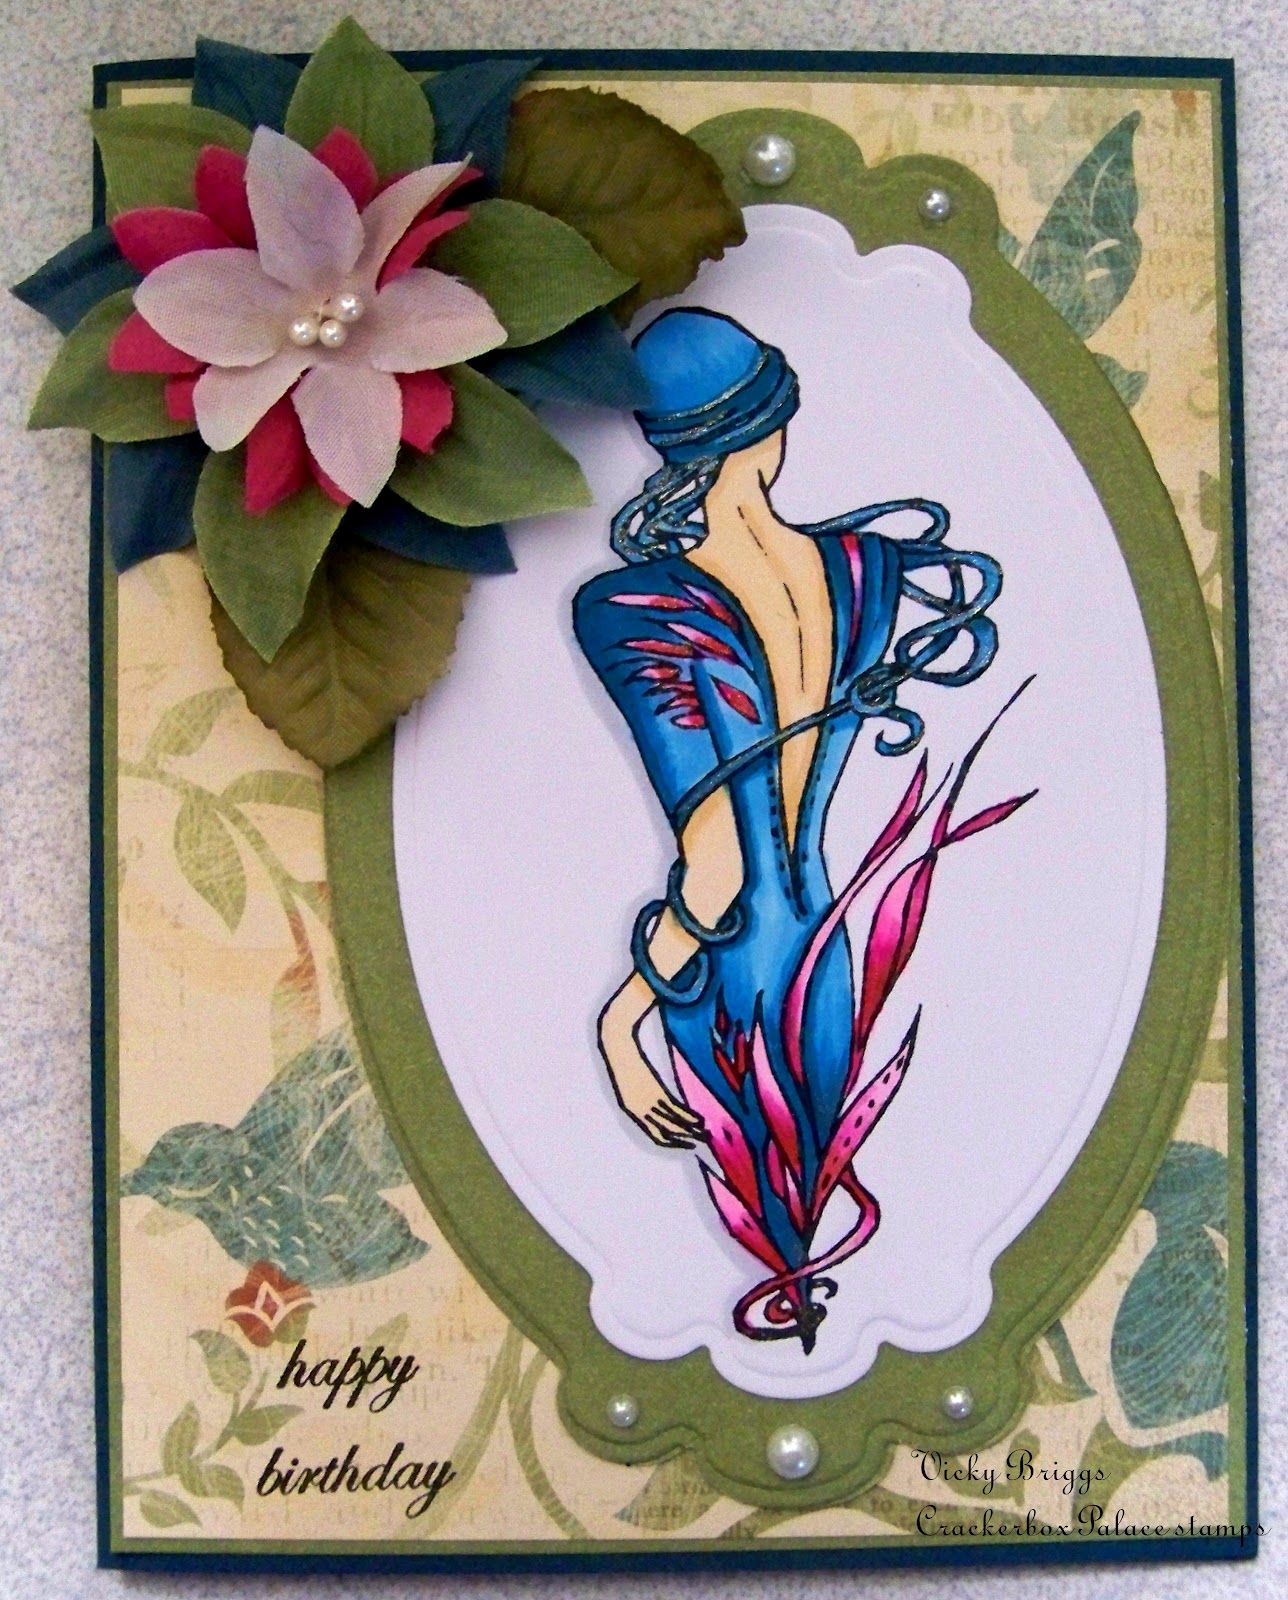 Crackerbox Palace rubber stamp Blog: Happy Birthday Lady